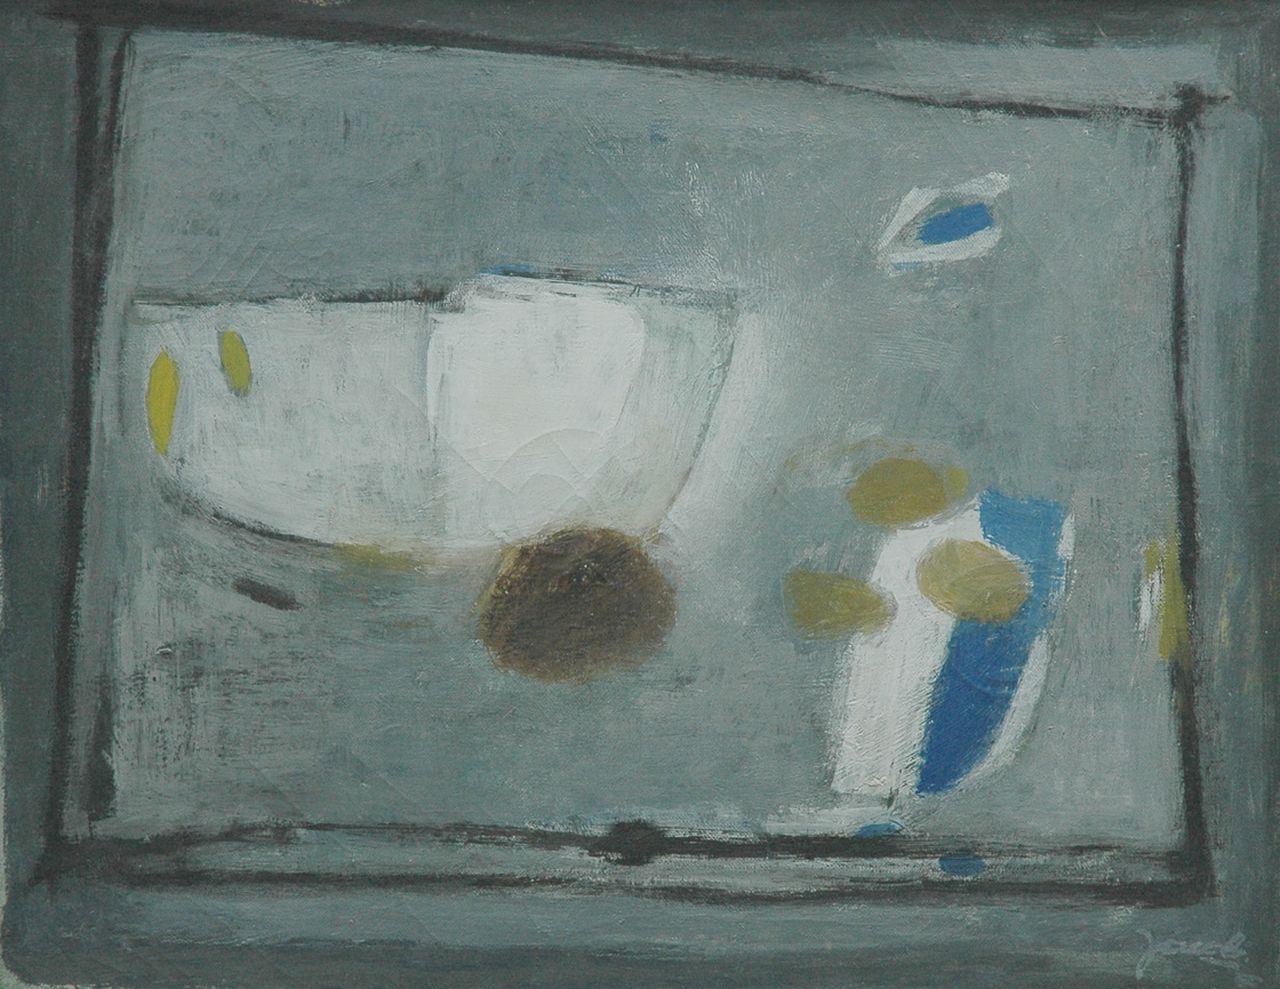 Nanninga J.  | Jacob 'Jaap' Nanninga, Composition, oil on canvas 39.8 x 49.9 cm, signed l.r. and dated '50